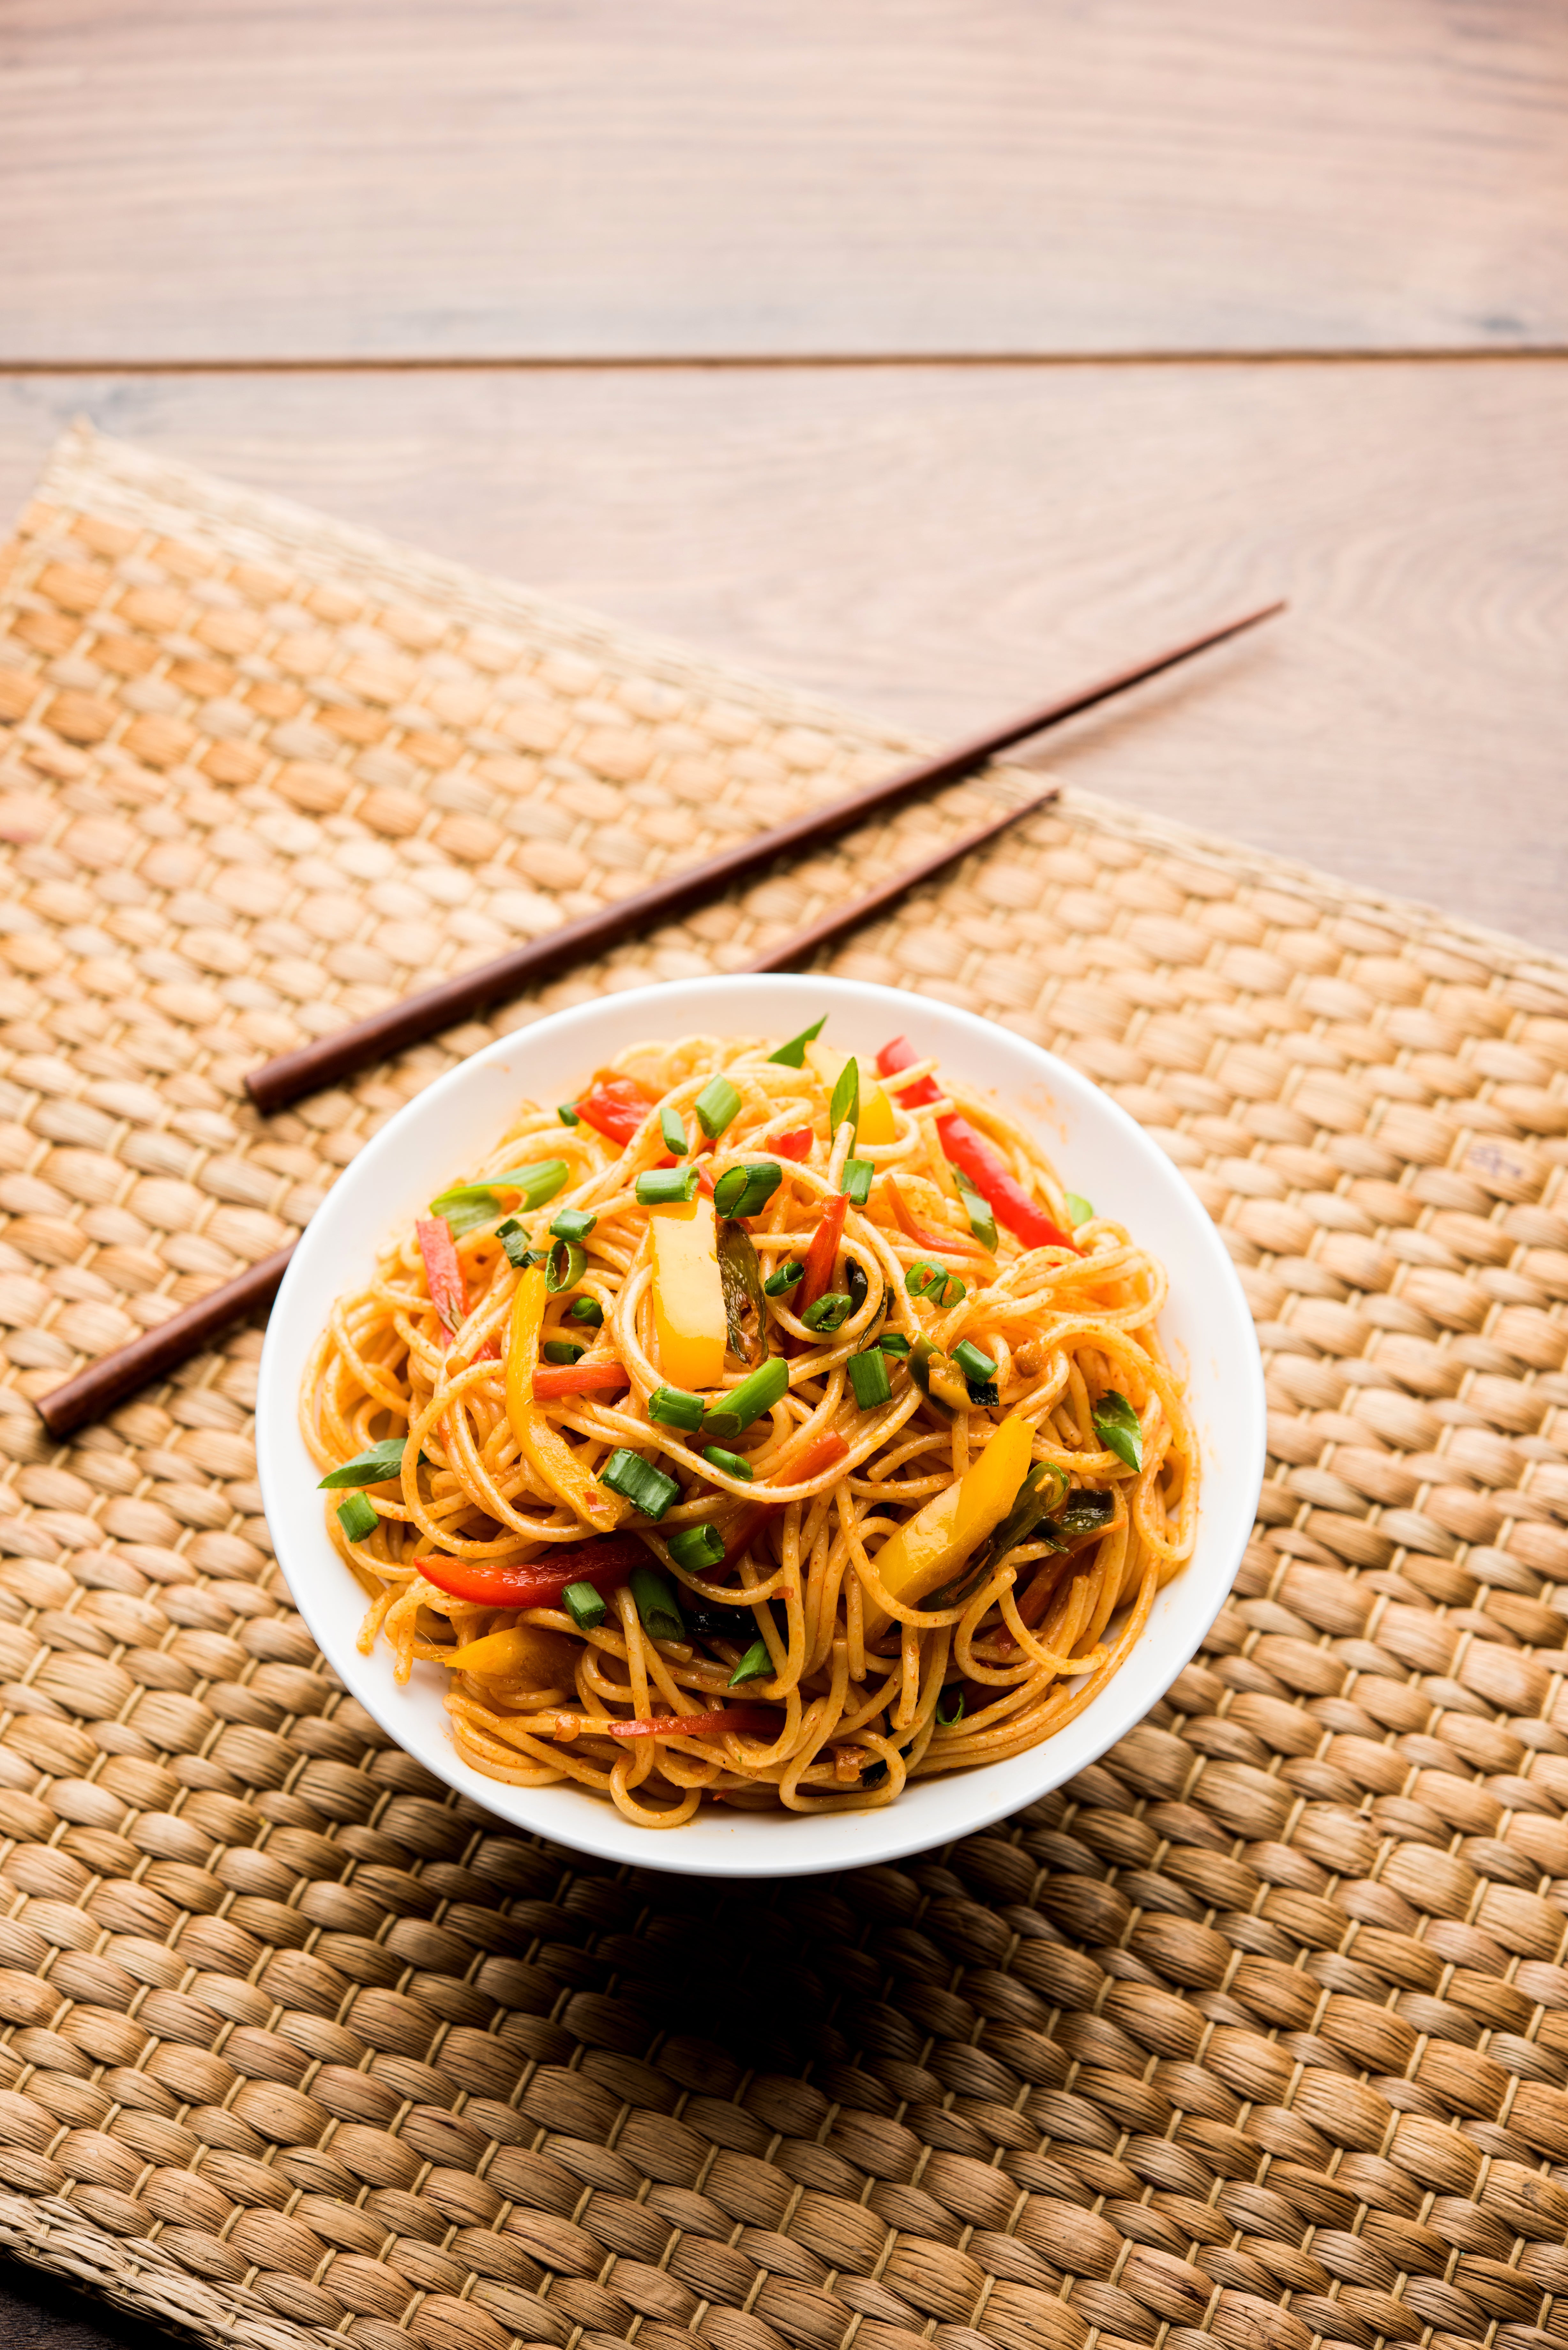 Cold sesame noodles became popular in the west in the 1970s